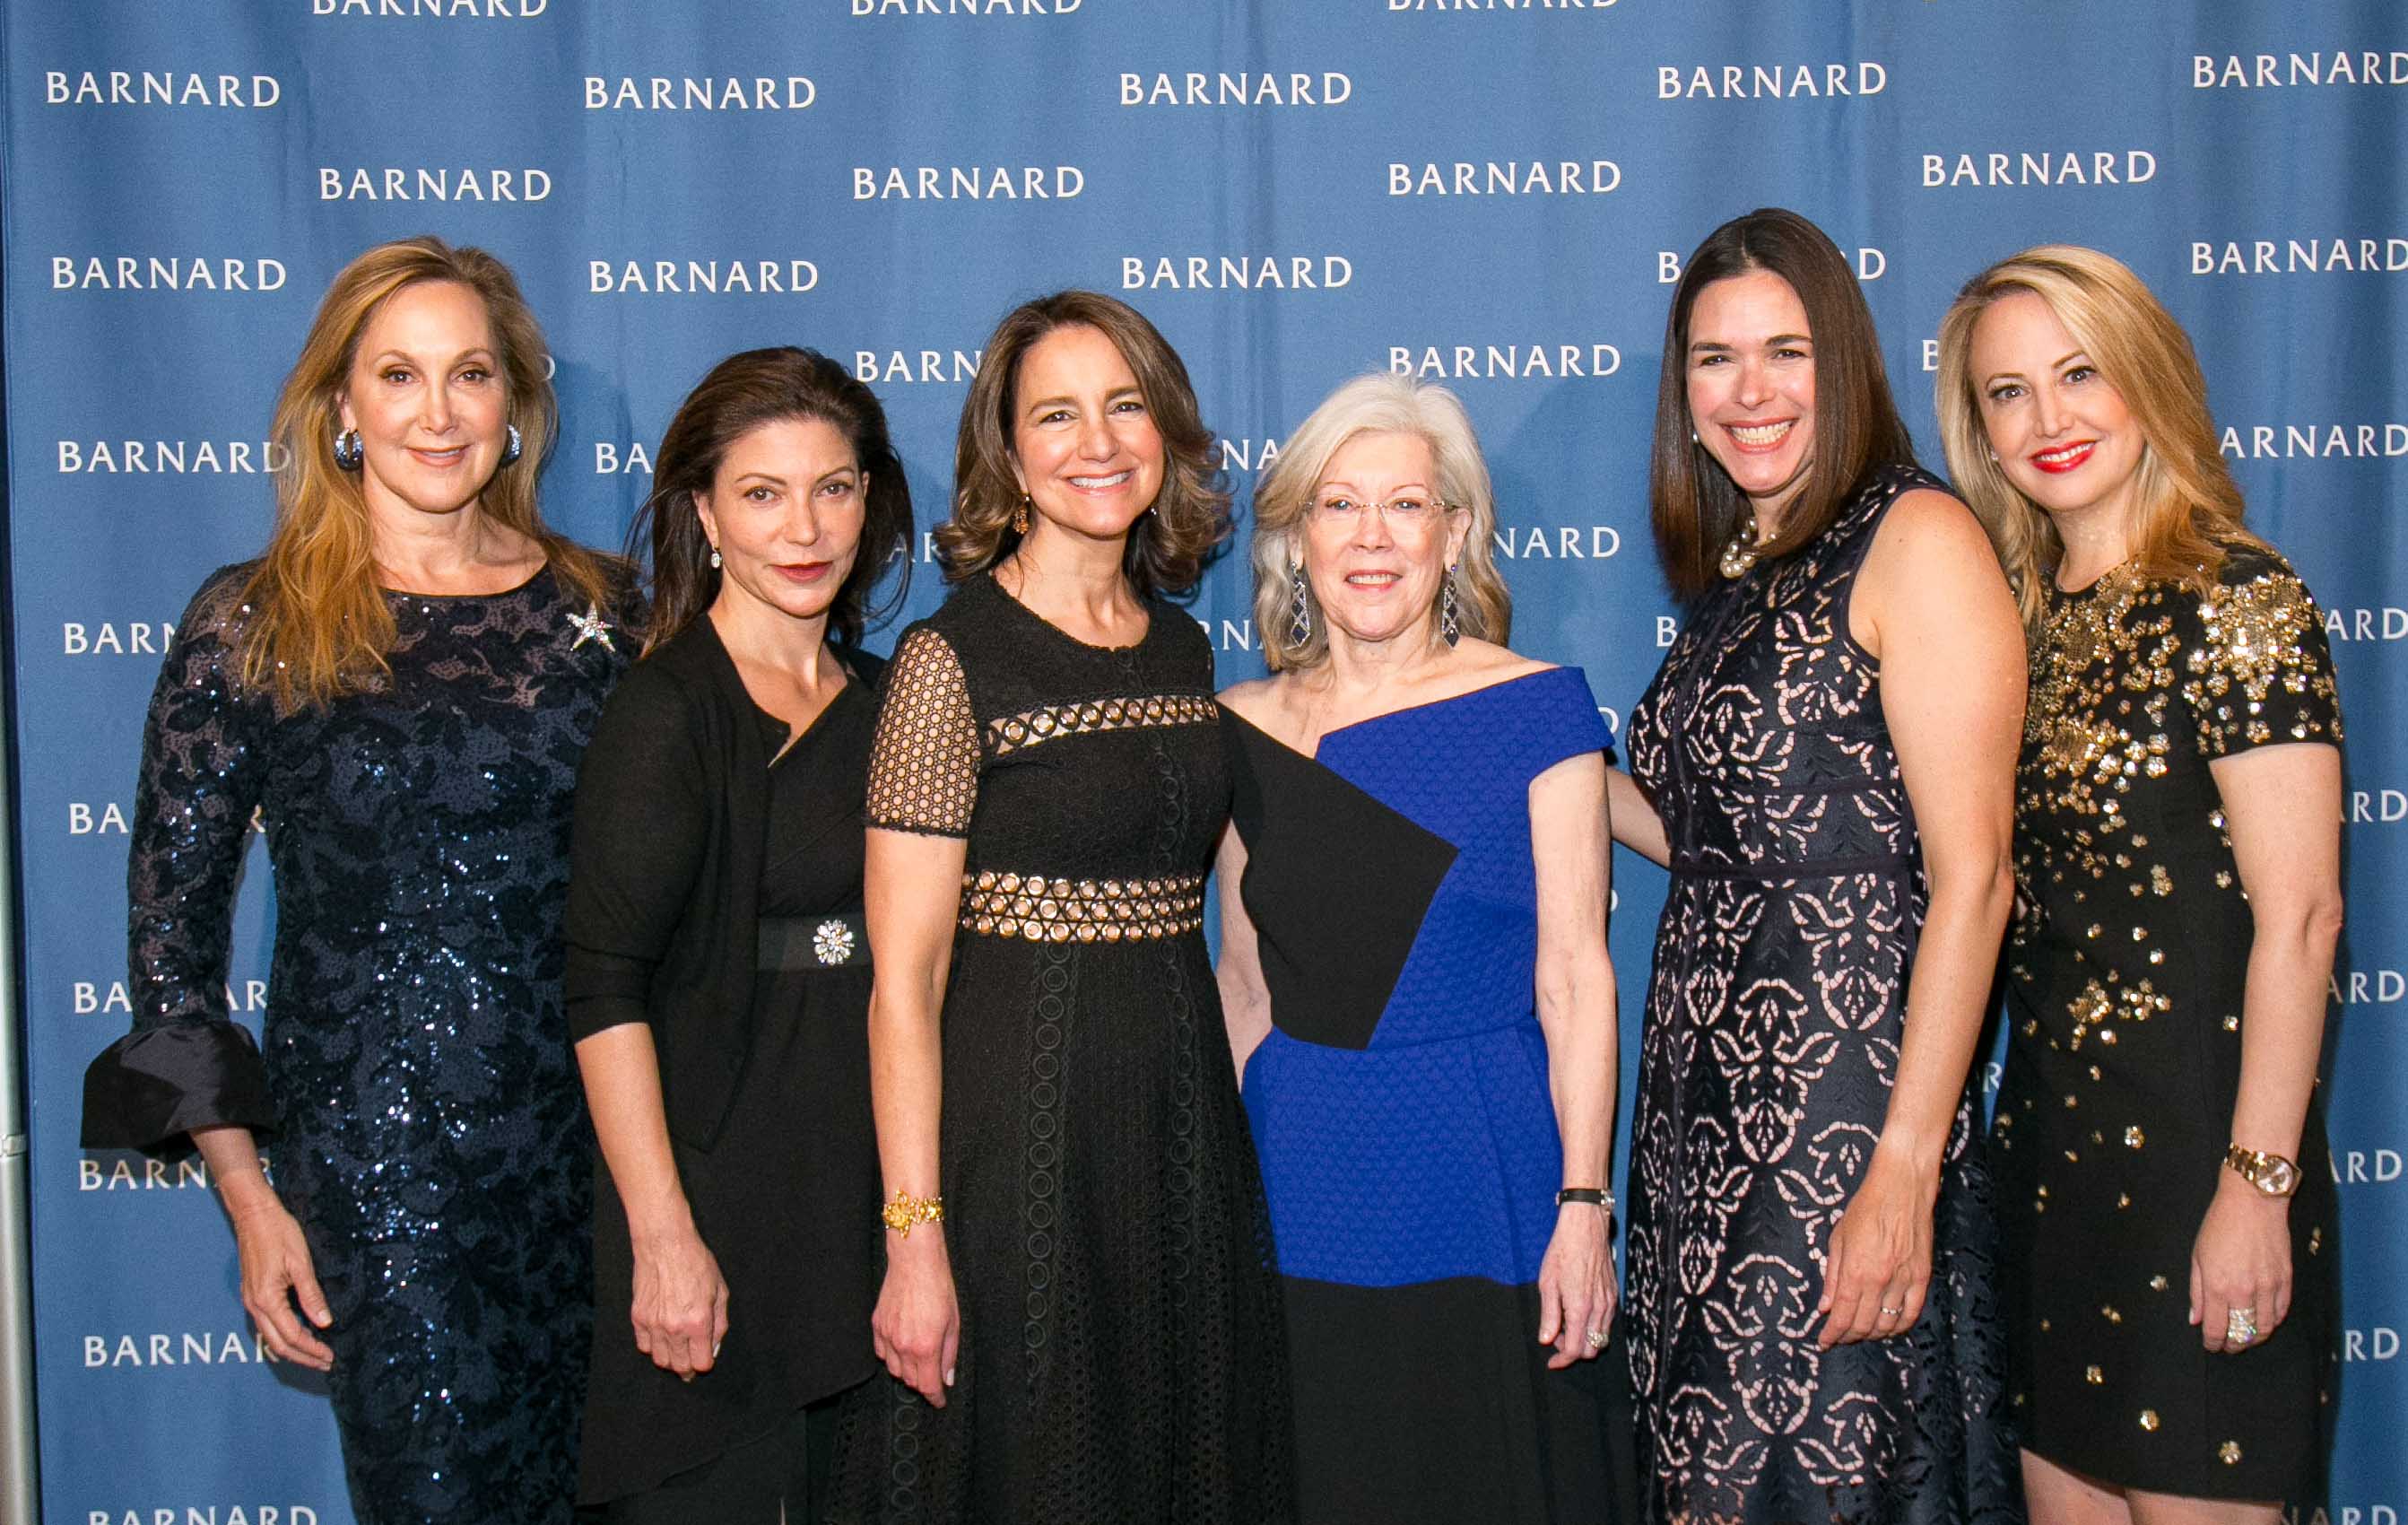 President Sian Beilock with the 2018 Annual Gala co-chairs and honorees